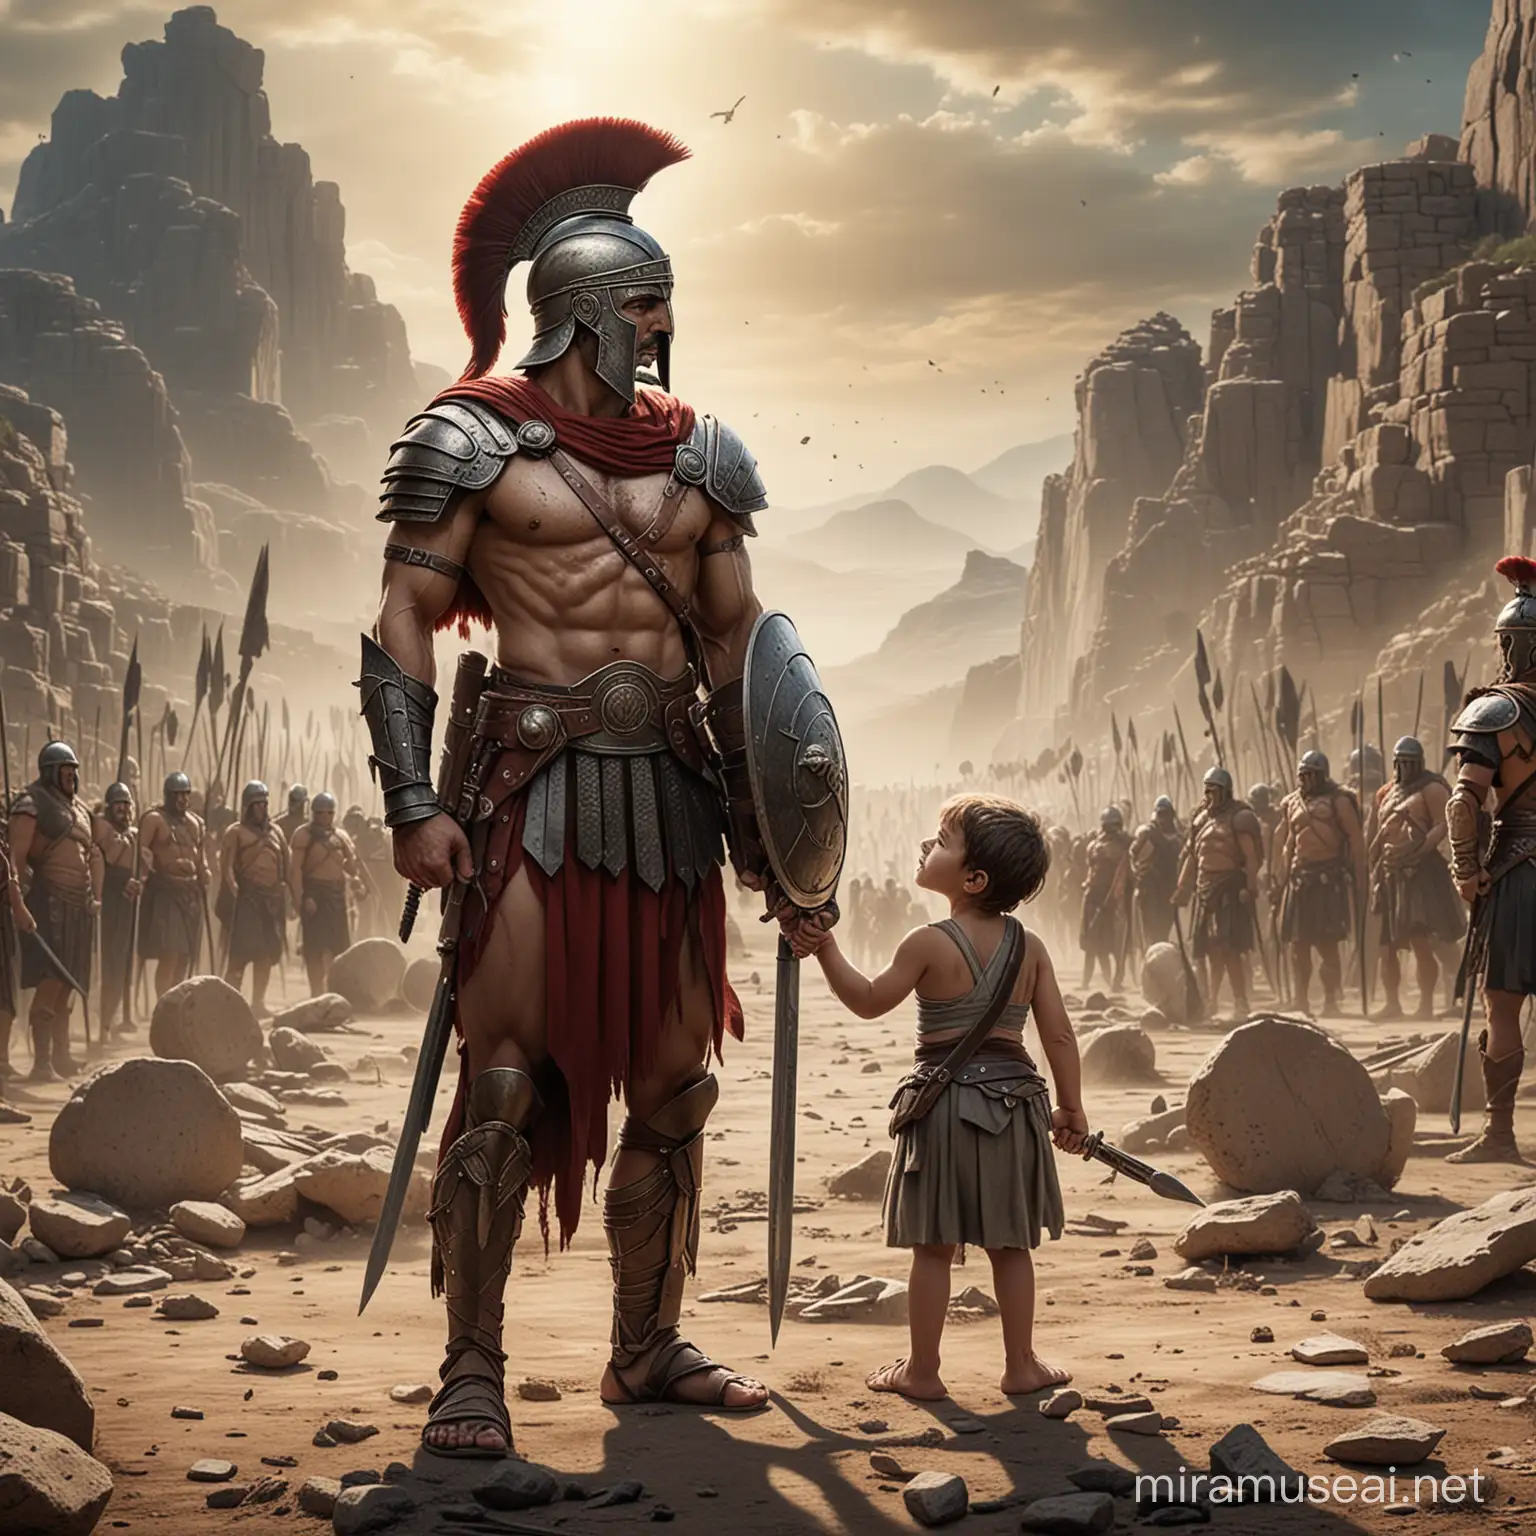 A lone male Spartan warrior standing in front of a mother and her child defending them against a large hoard of barbarians